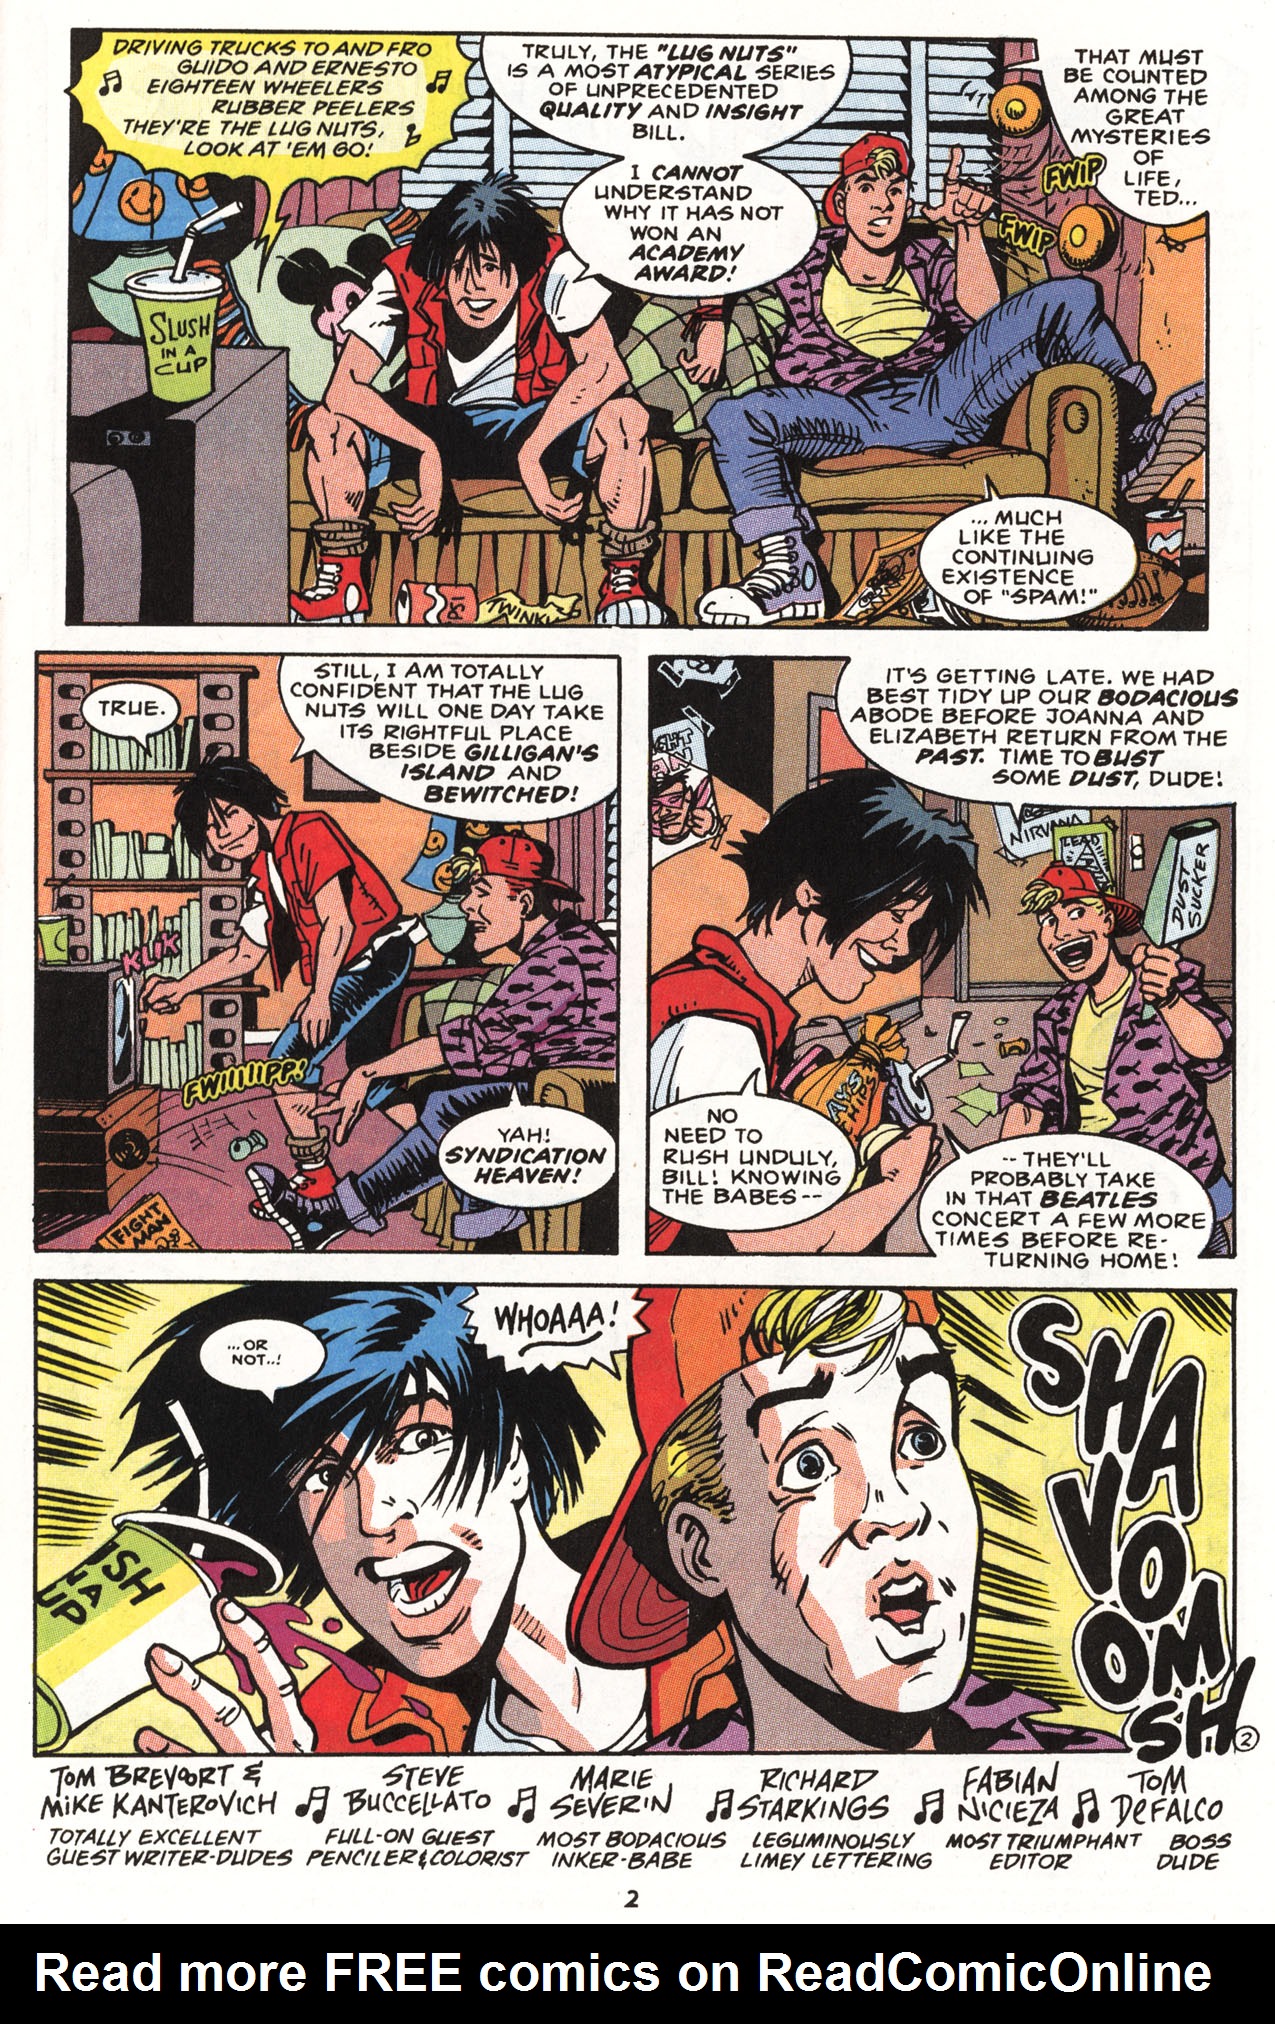 Read online Bill & Ted's Excellent Comic Book comic -  Issue #8 - 4